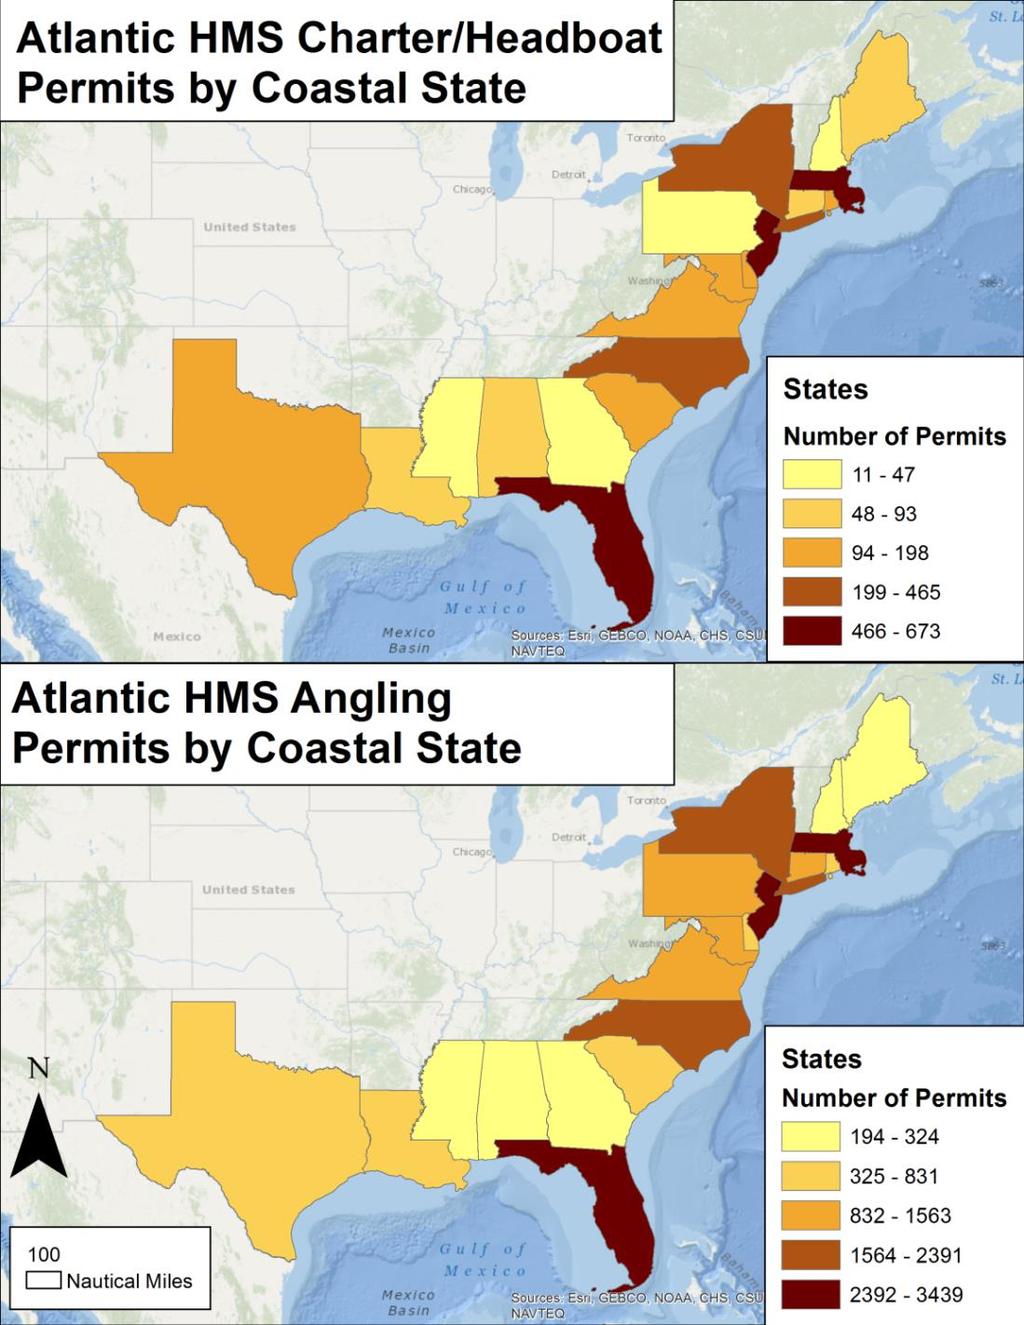 Figure 11: Atlantic HMS Charter/Headboat and Recreational (HMS Angling) permits by state.